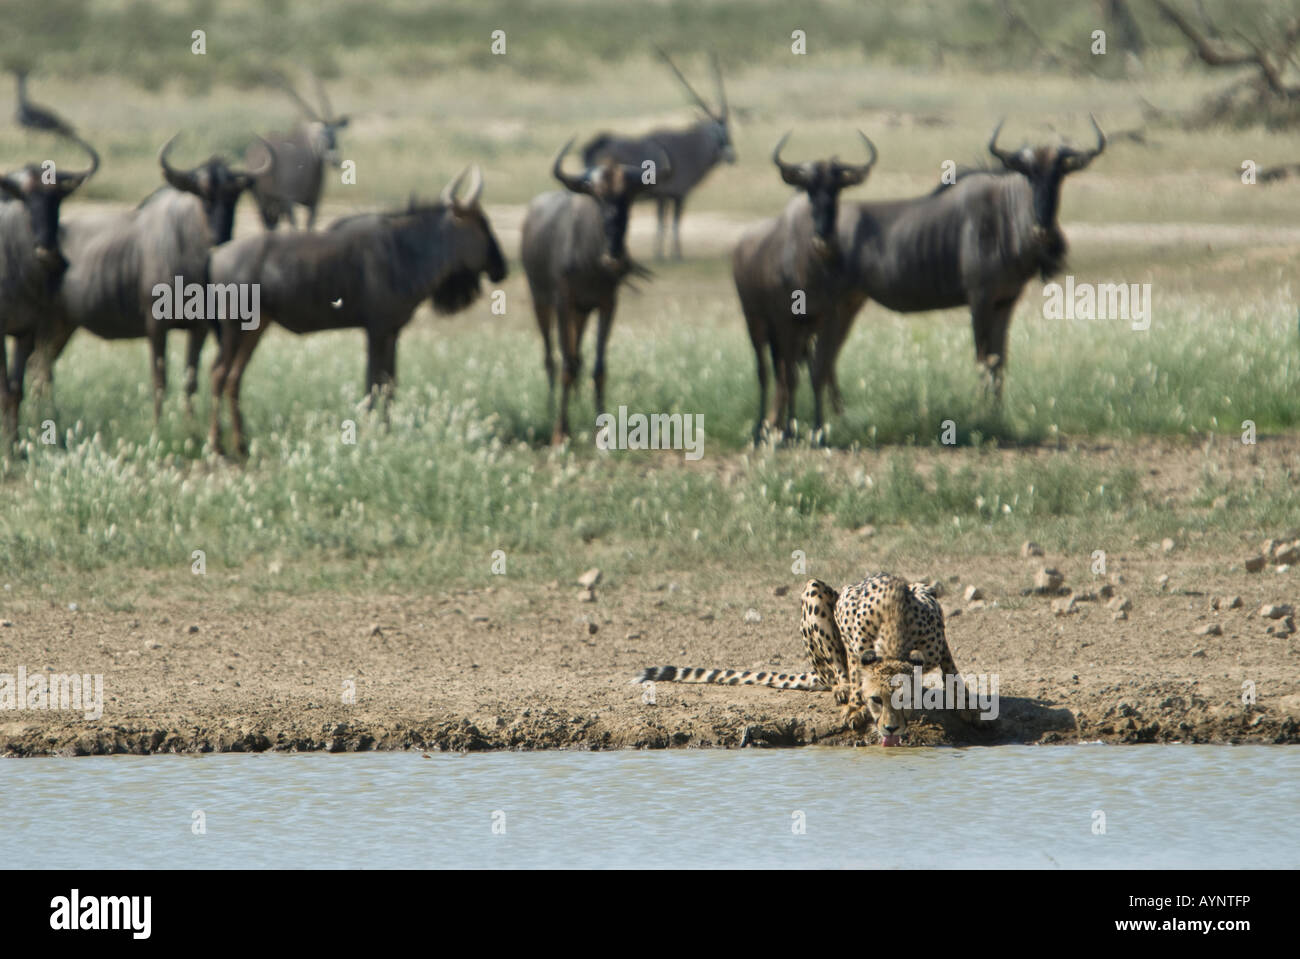 A cheetah drinking from a waterhole in the Kalahari semi desert while a herd of blue wildebeest look on. Stock Photo